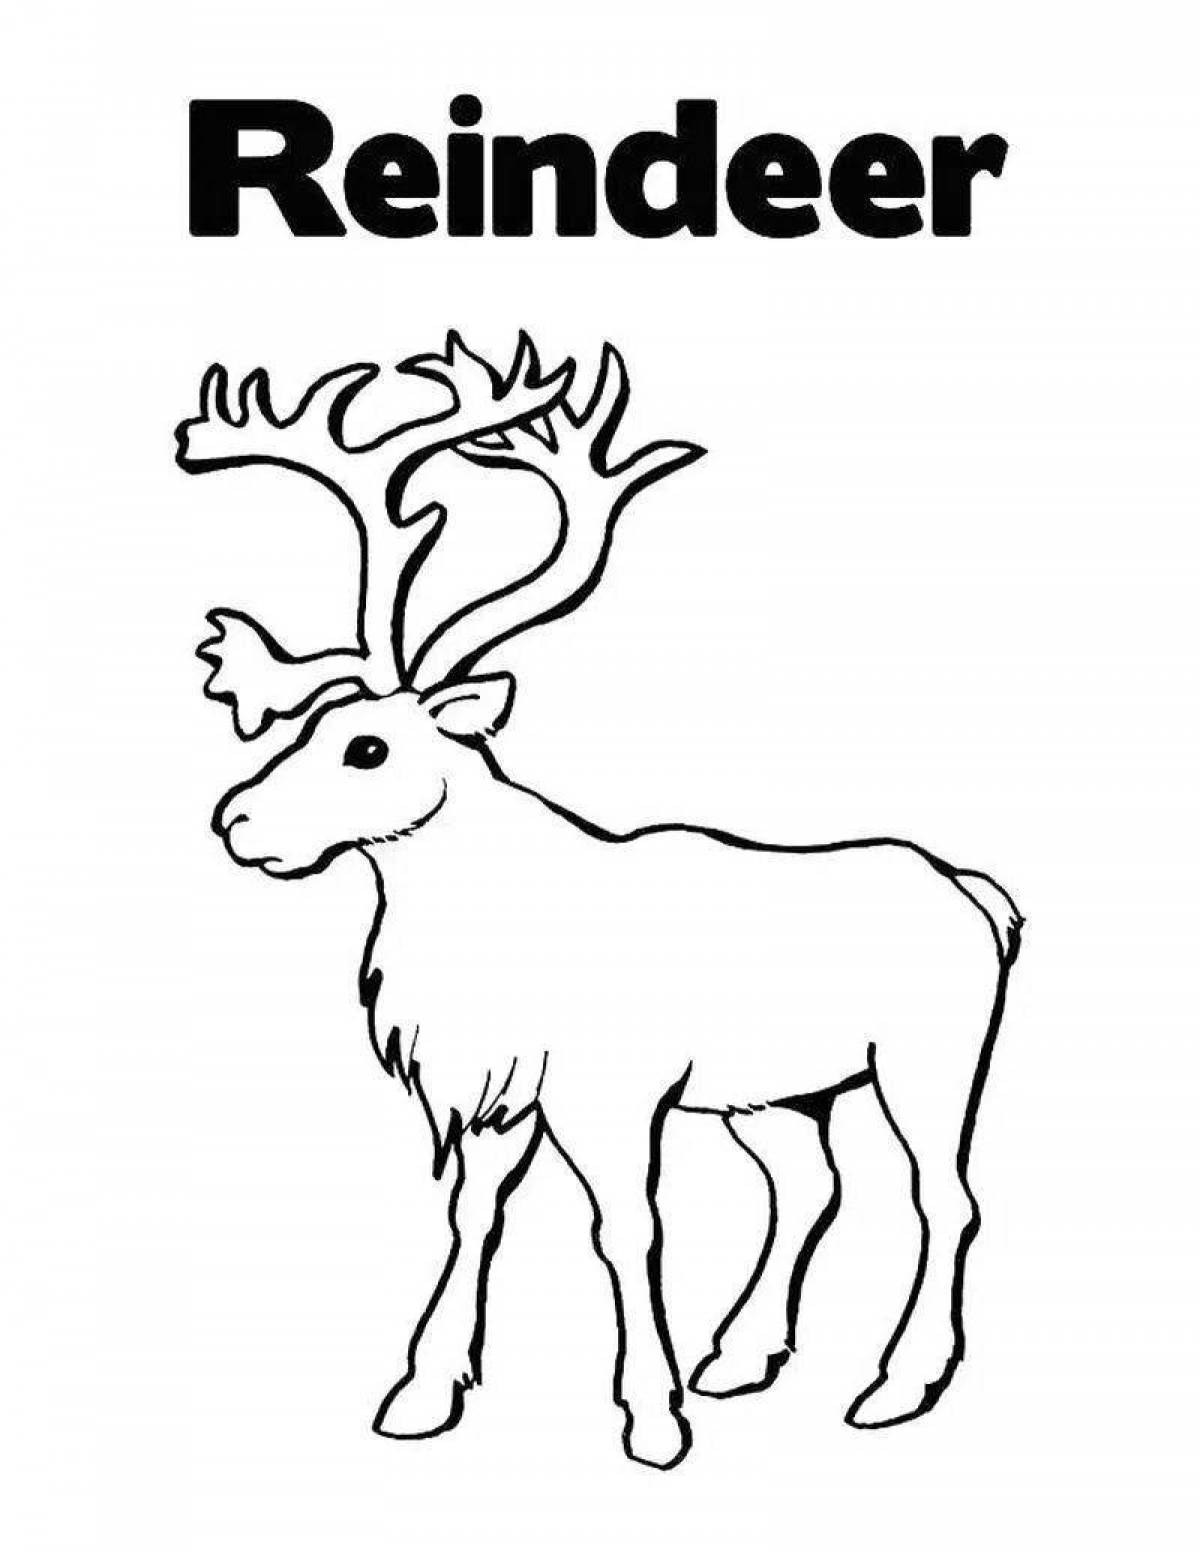 Gorgeous deer coloring book for kids